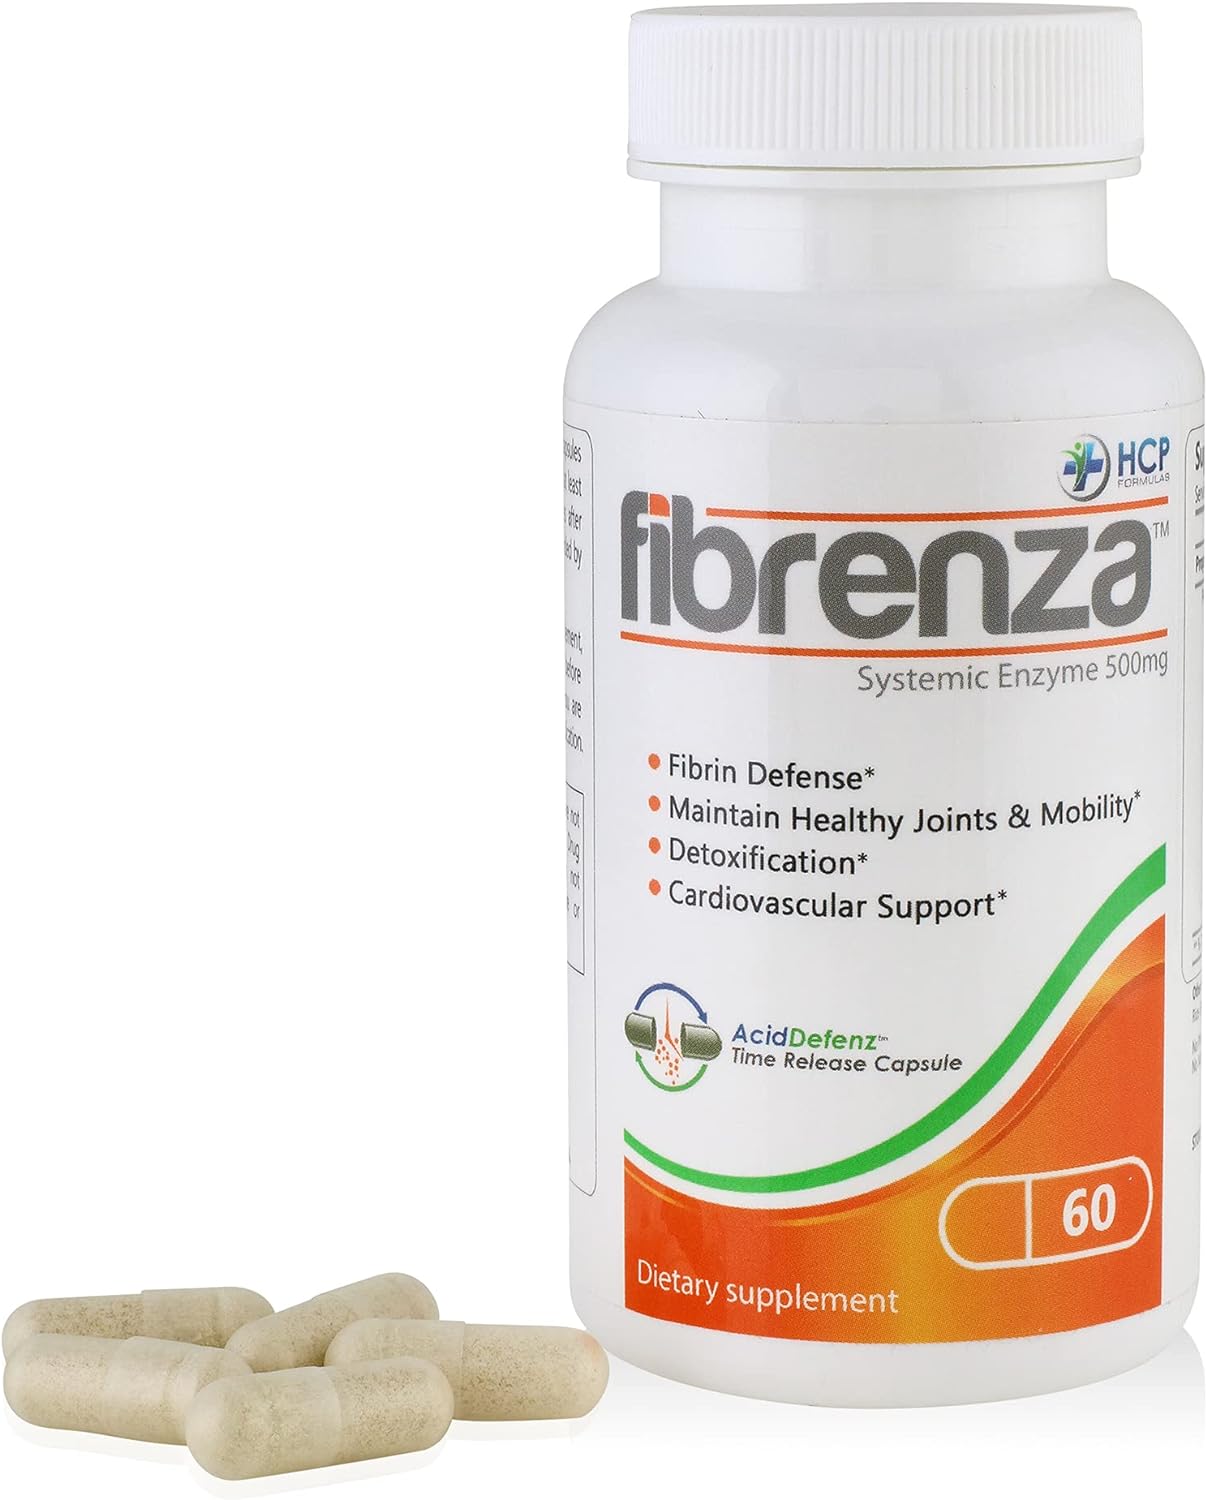 Fibrenza supports the body's ability to dissolve fibrin and cleanse the body of impurities with 13 powerful systemic enzymes for maximum body-wide benefits in a reliable, time-released capsule.